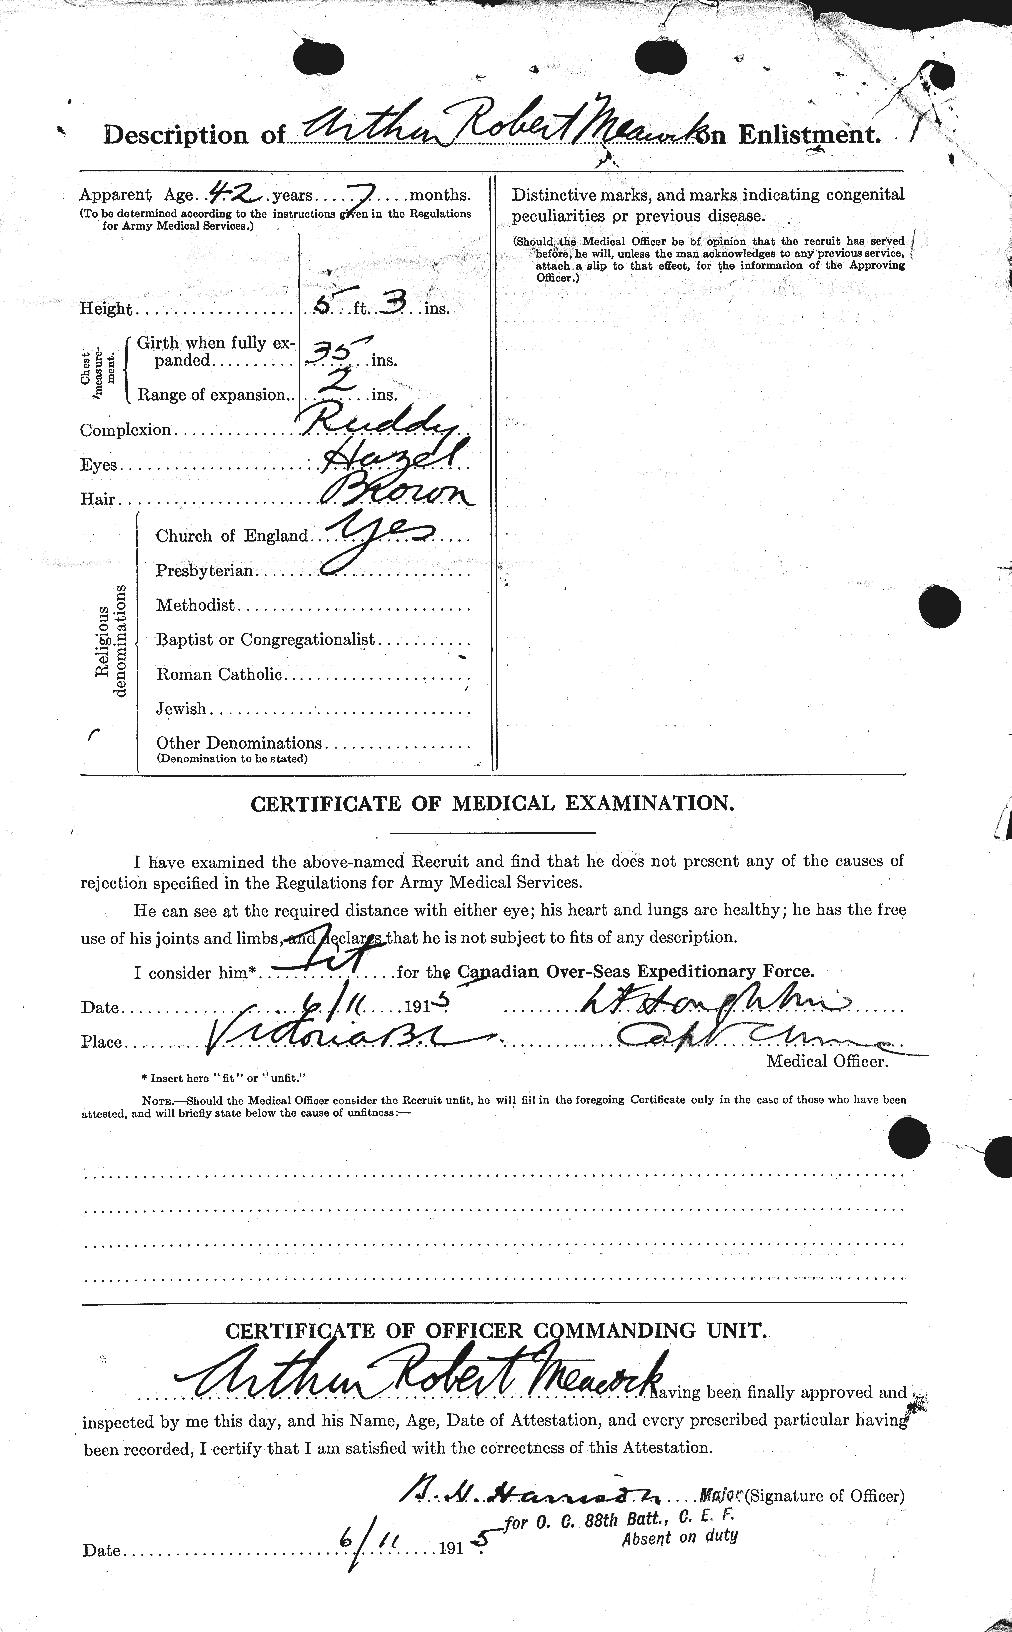 Personnel Records of the First World War - CEF 488286b